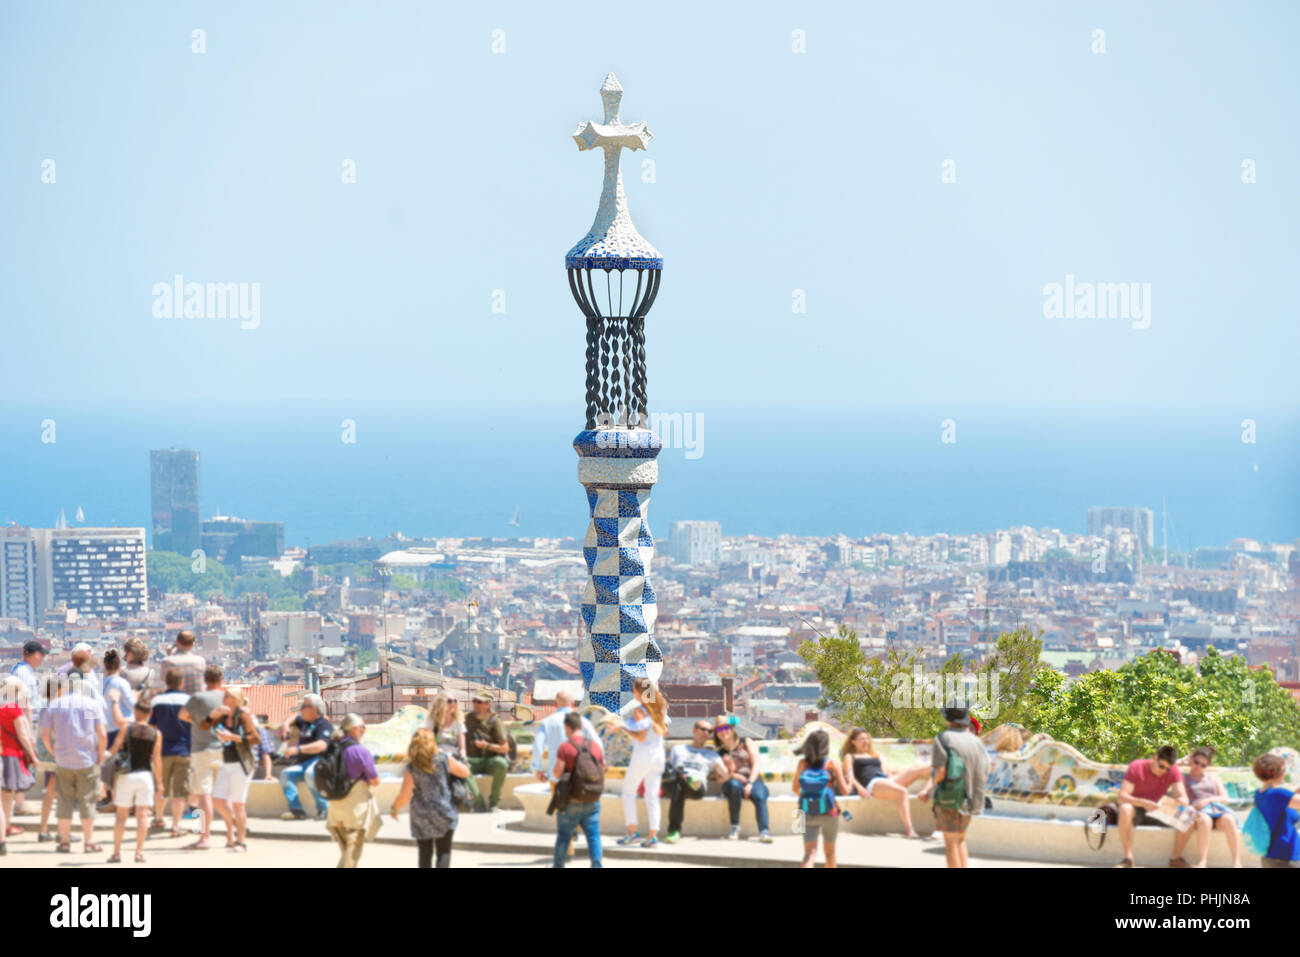 Park Guell with crowd of people Stock Photo